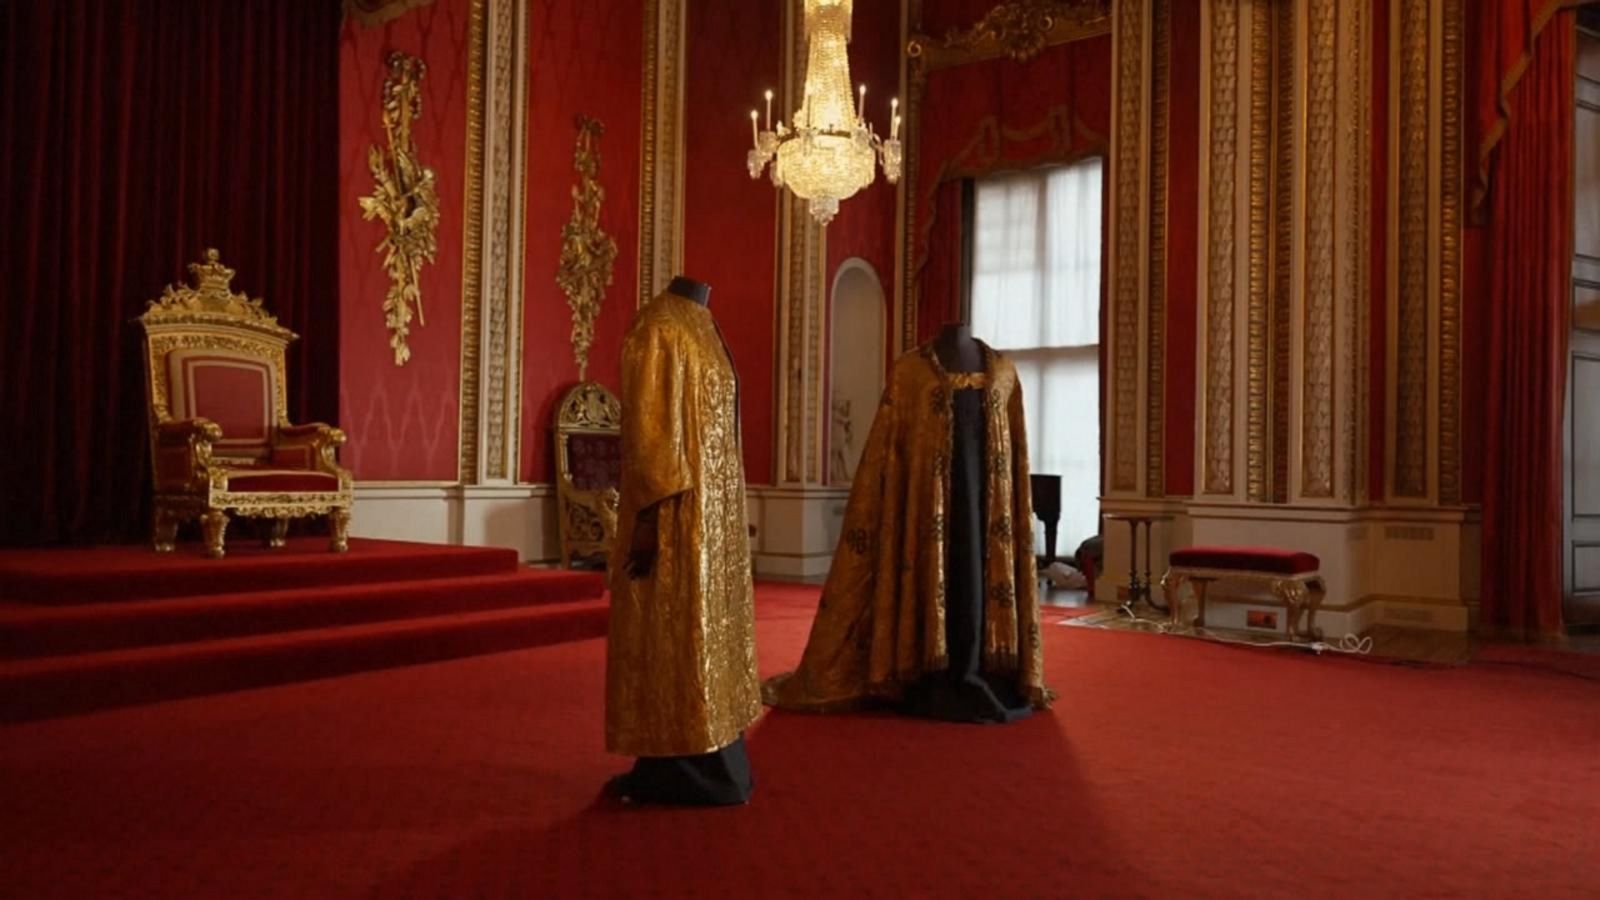 A first look at the coronation robes